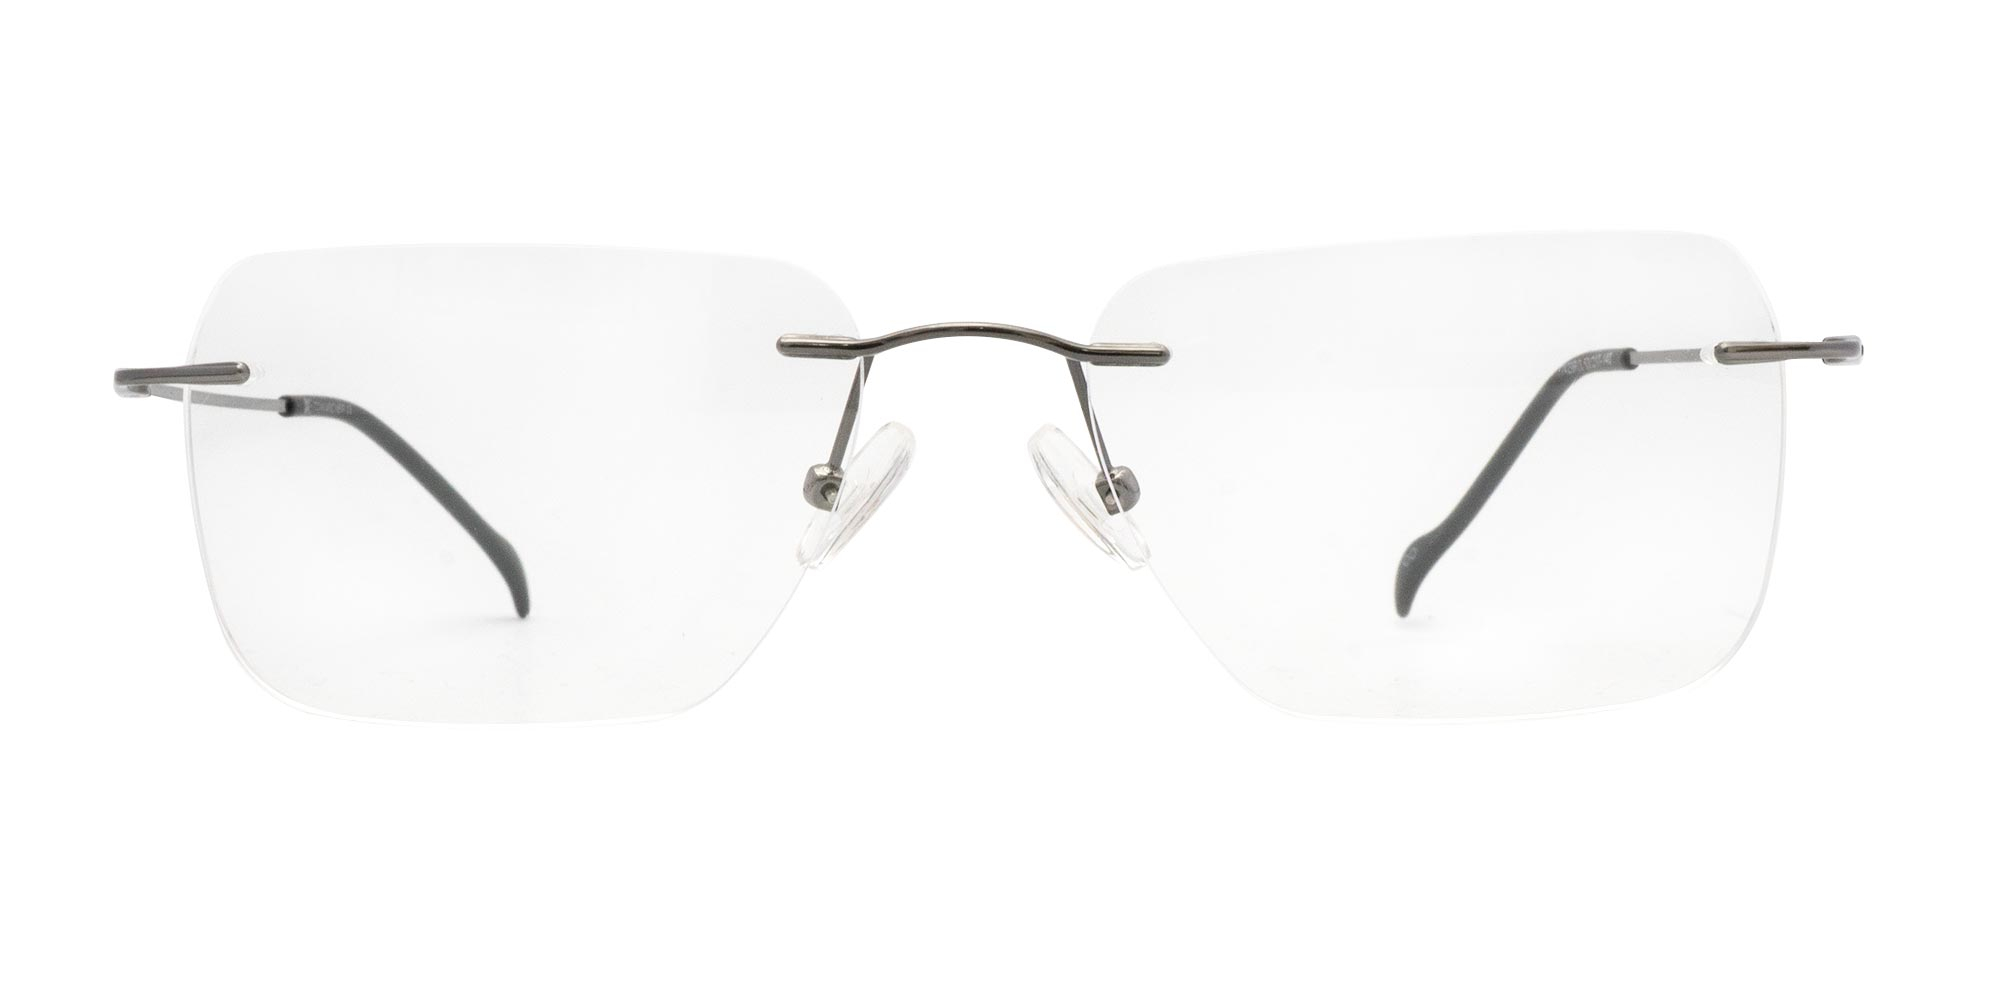 WITHAM 3 - Rimless Glasses Online | Specscart.®